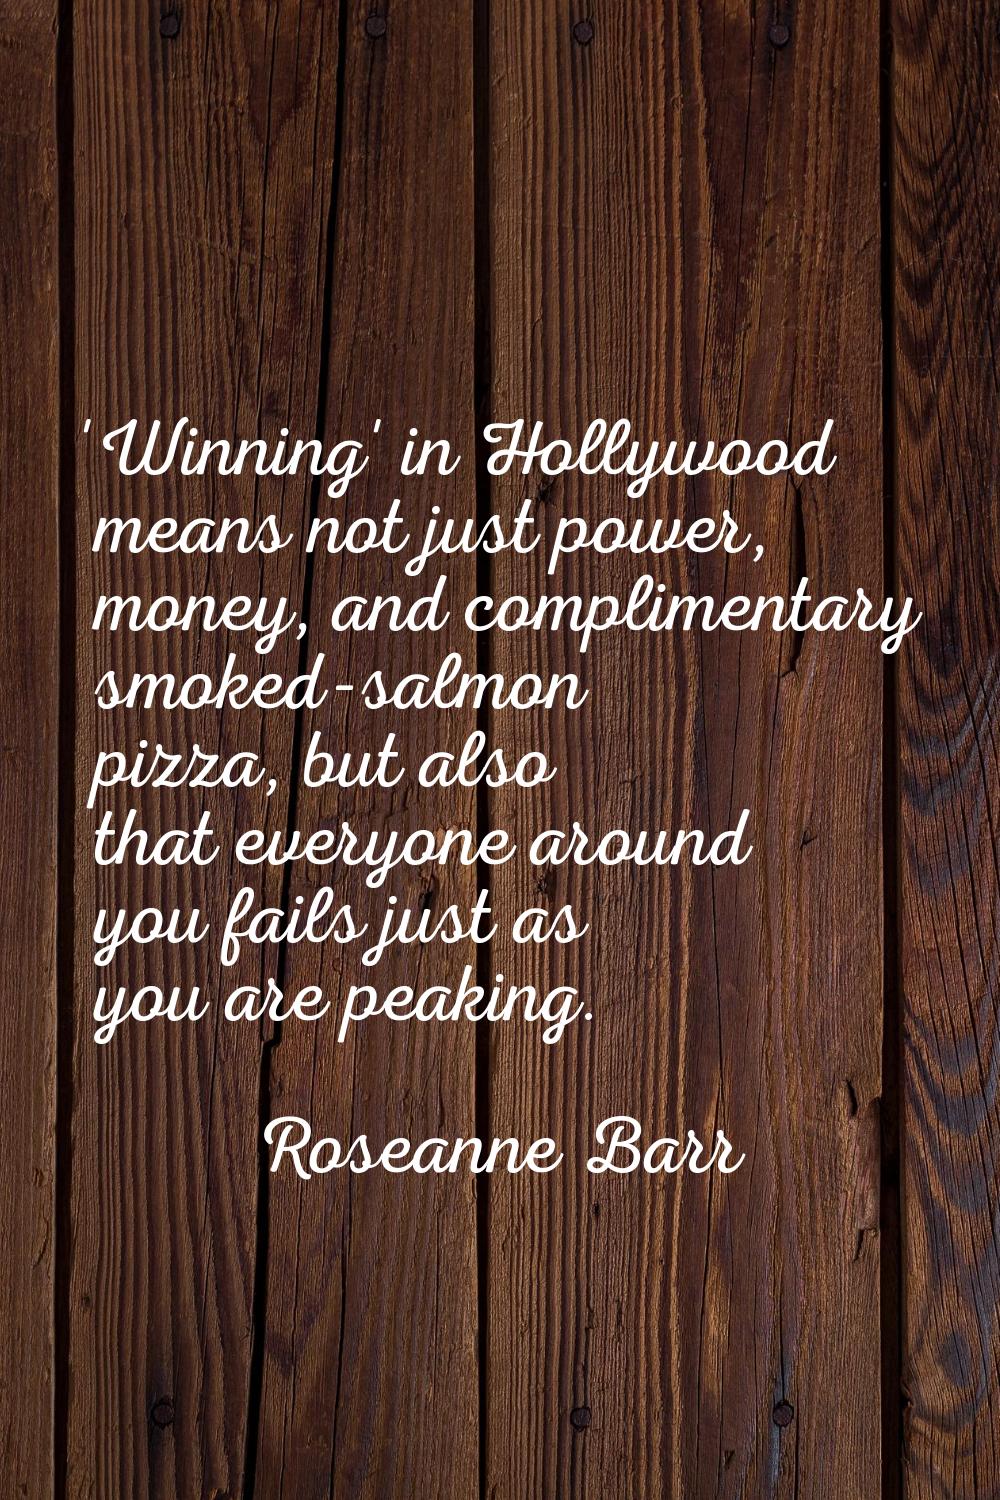 'Winning' in Hollywood means not just power, money, and complimentary smoked-salmon pizza, but also